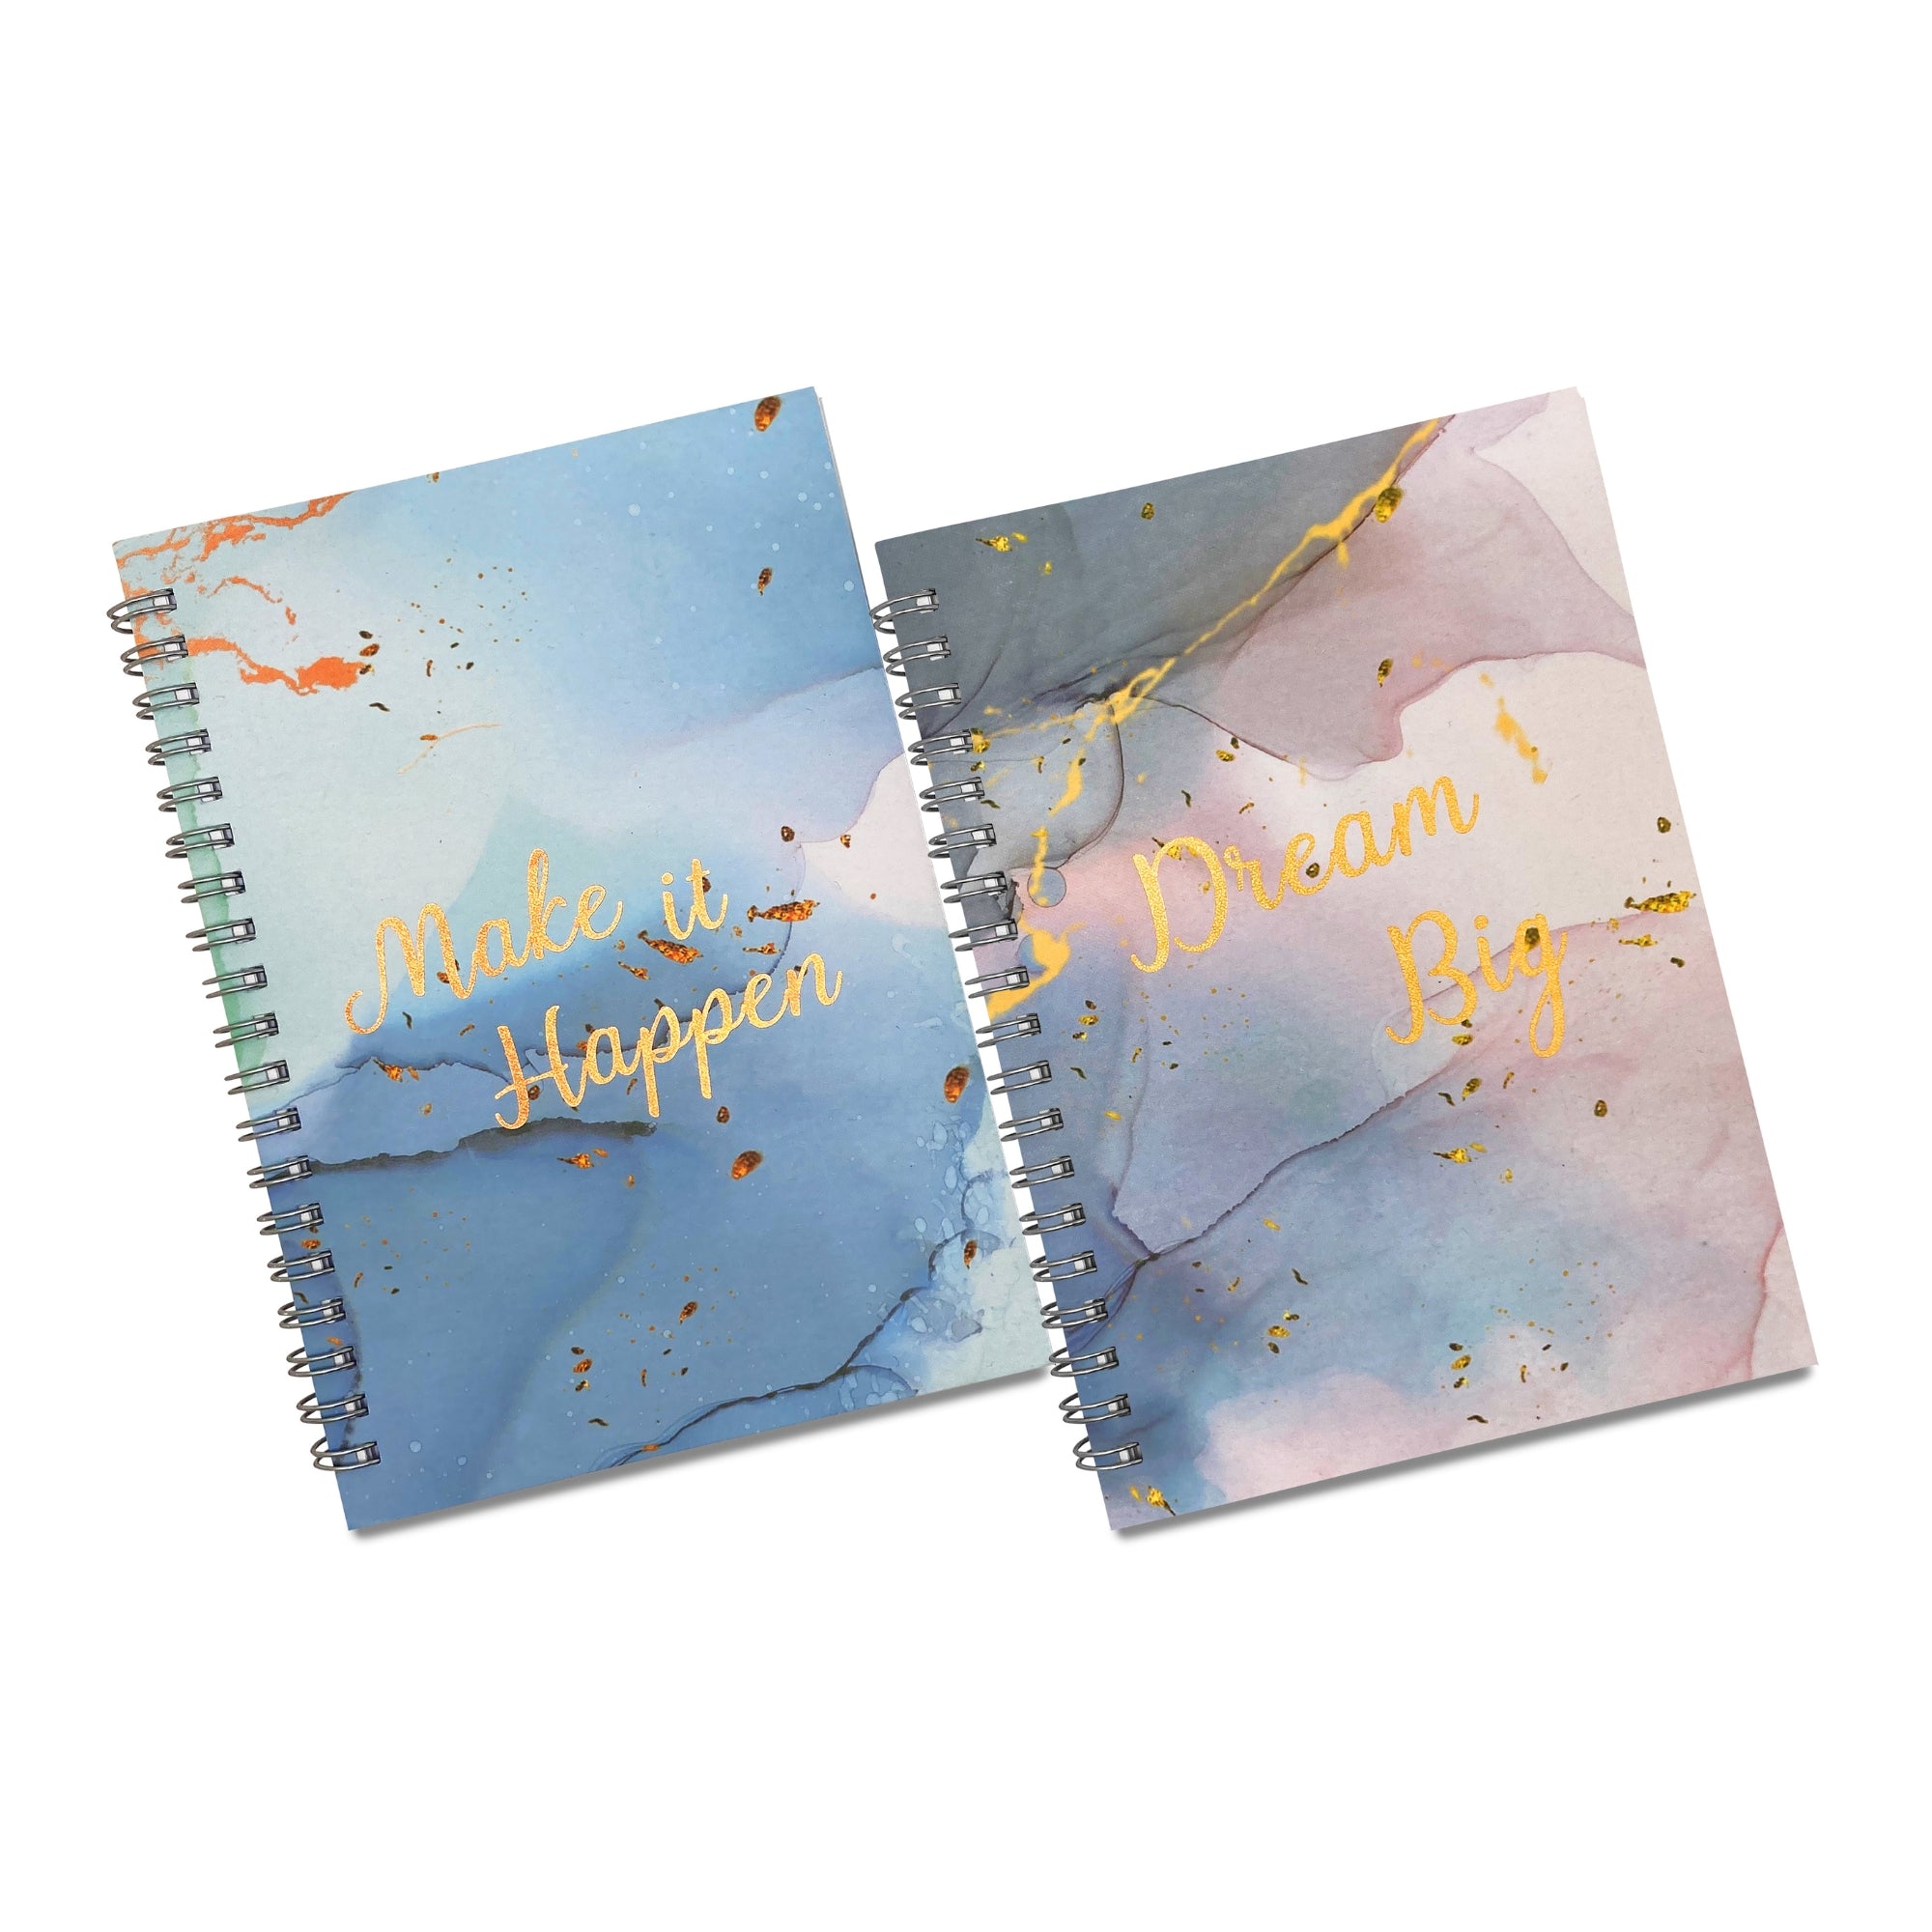 5x7 Inches Wirebound Notebooks 80 Sheets with Hot Stamped Covers (2-Pack)